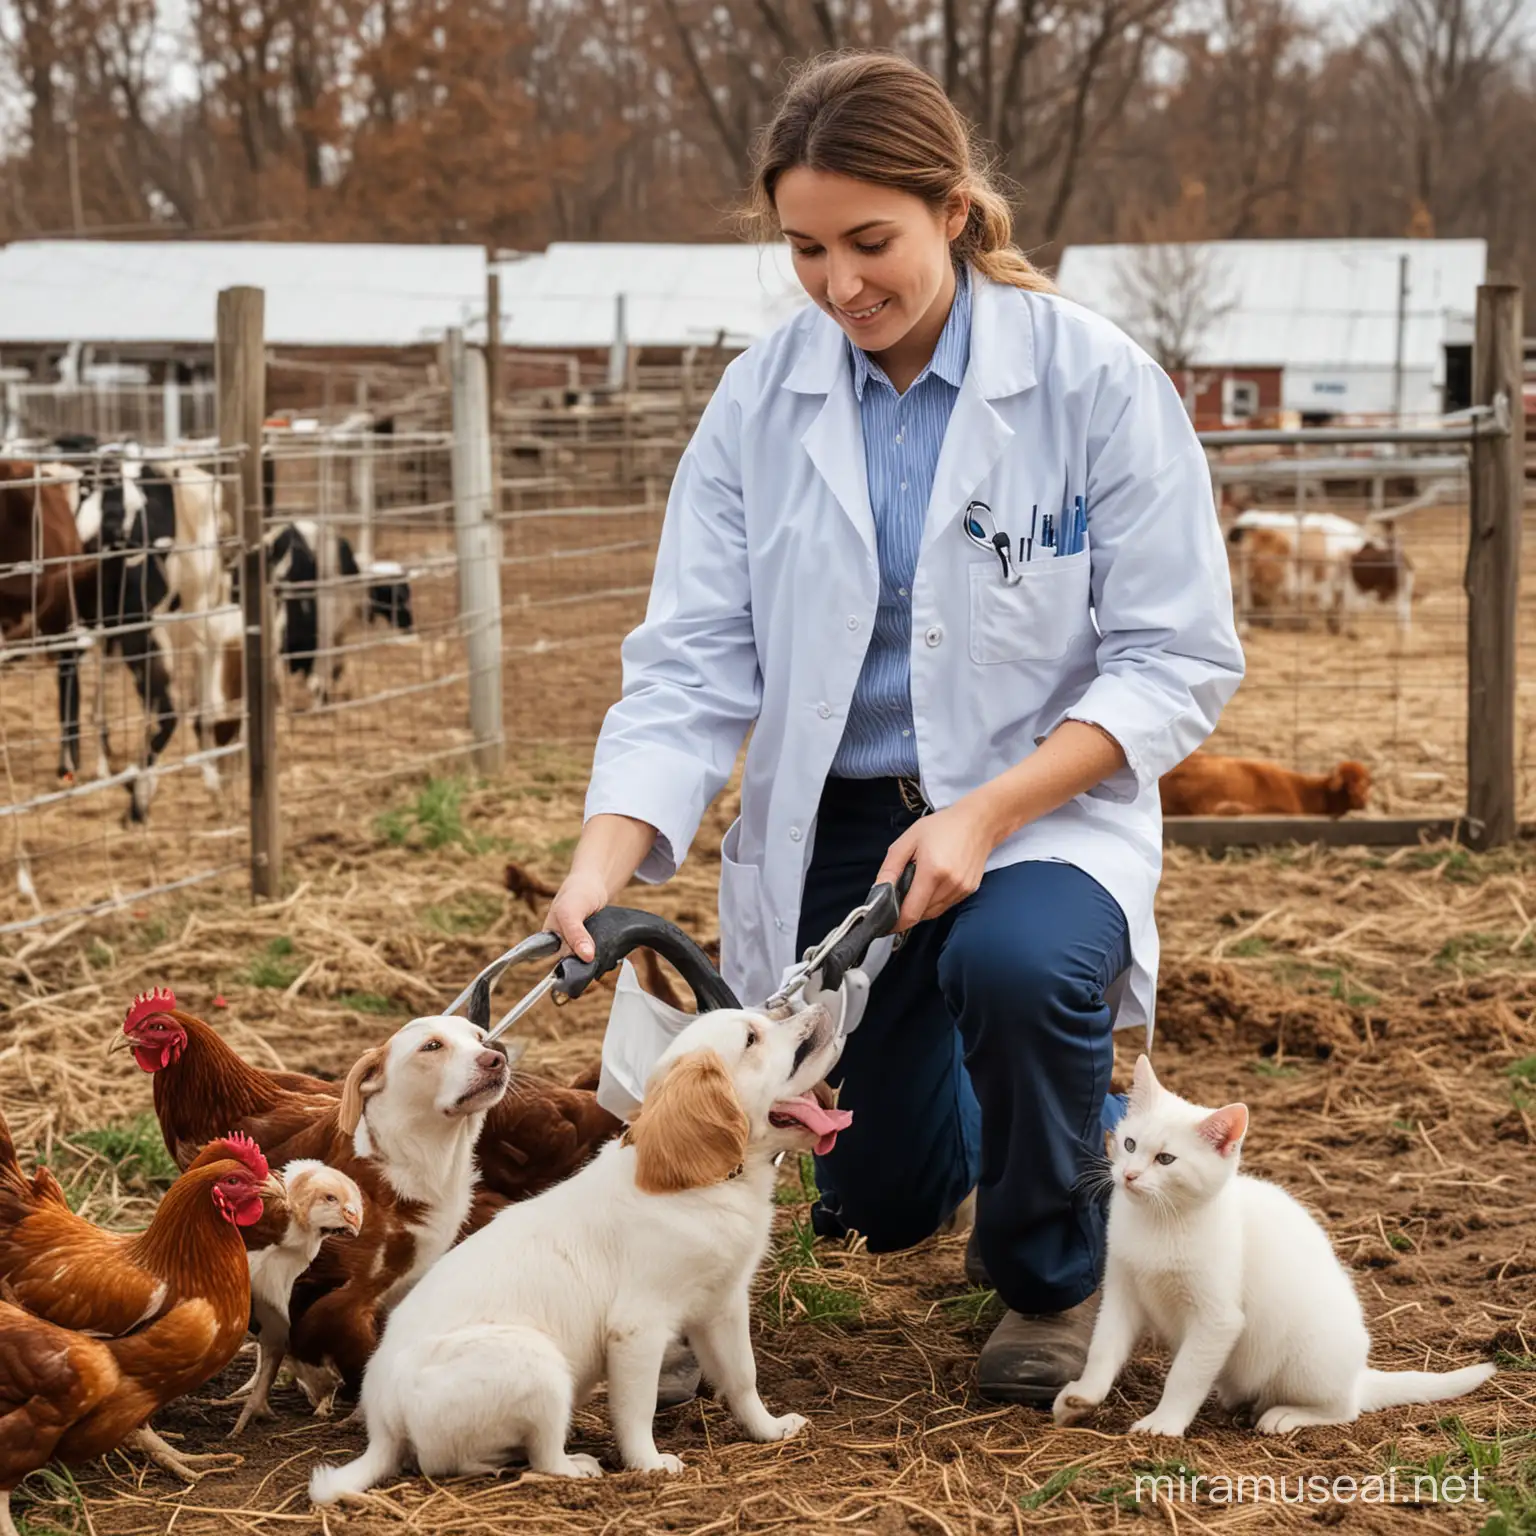 veterinarian treats chickens and  cows and cats and dogs on a farm